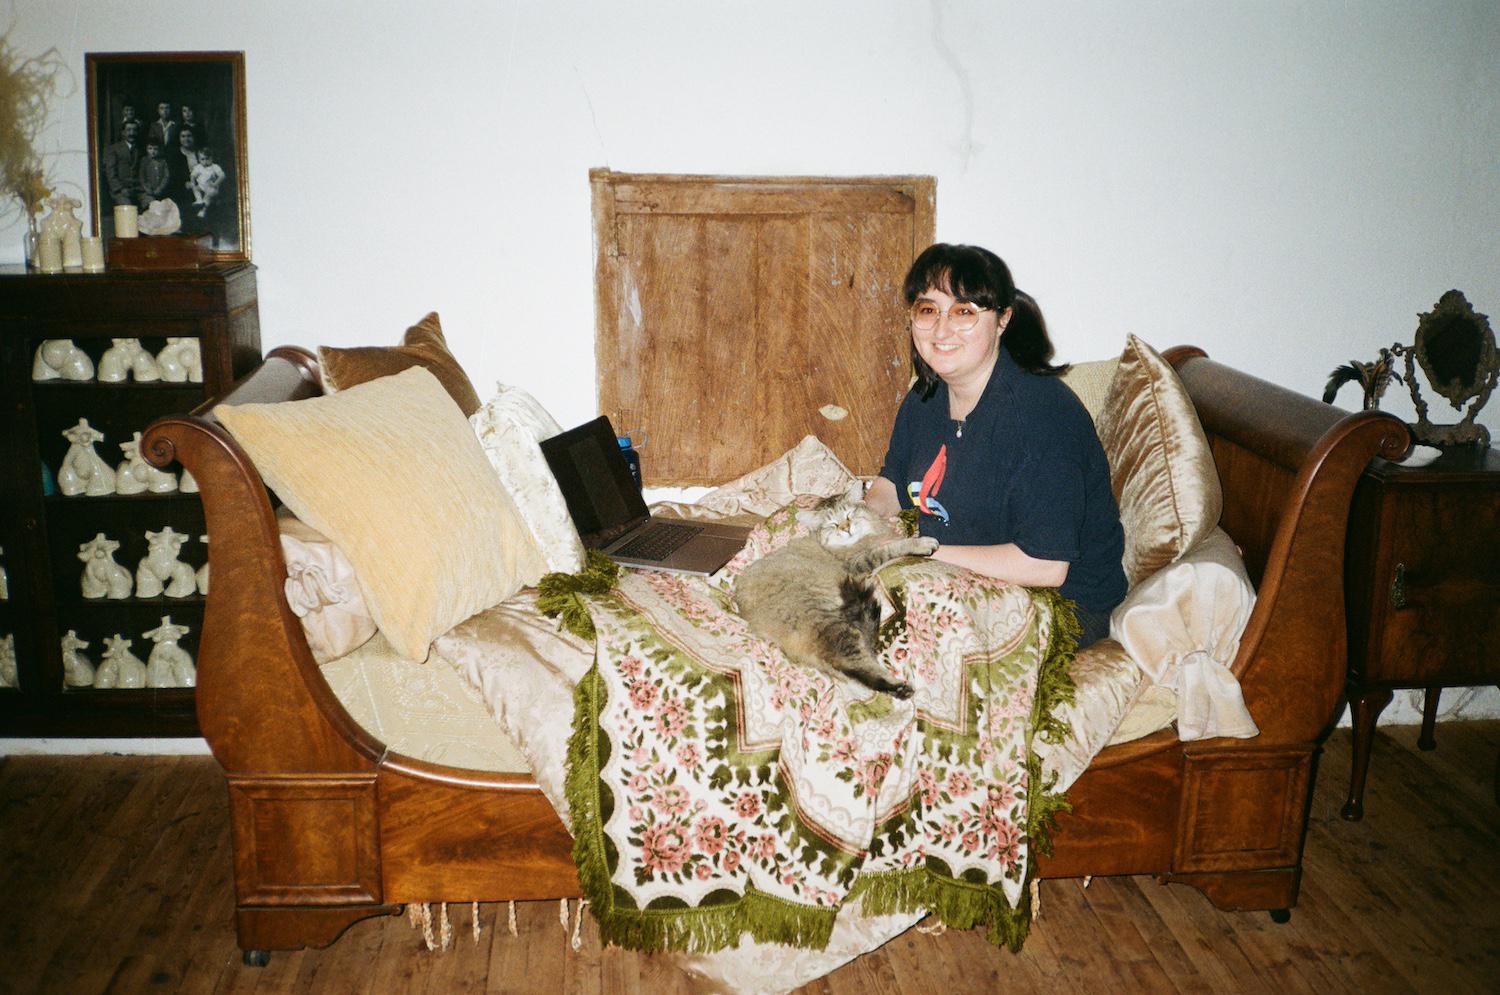 Gabrielle smiling on an antique day bed under blankets with a laptop and a beautiful cat called Maahs on her lap, who looks like a Norwegian forest cat or a Siberian cat